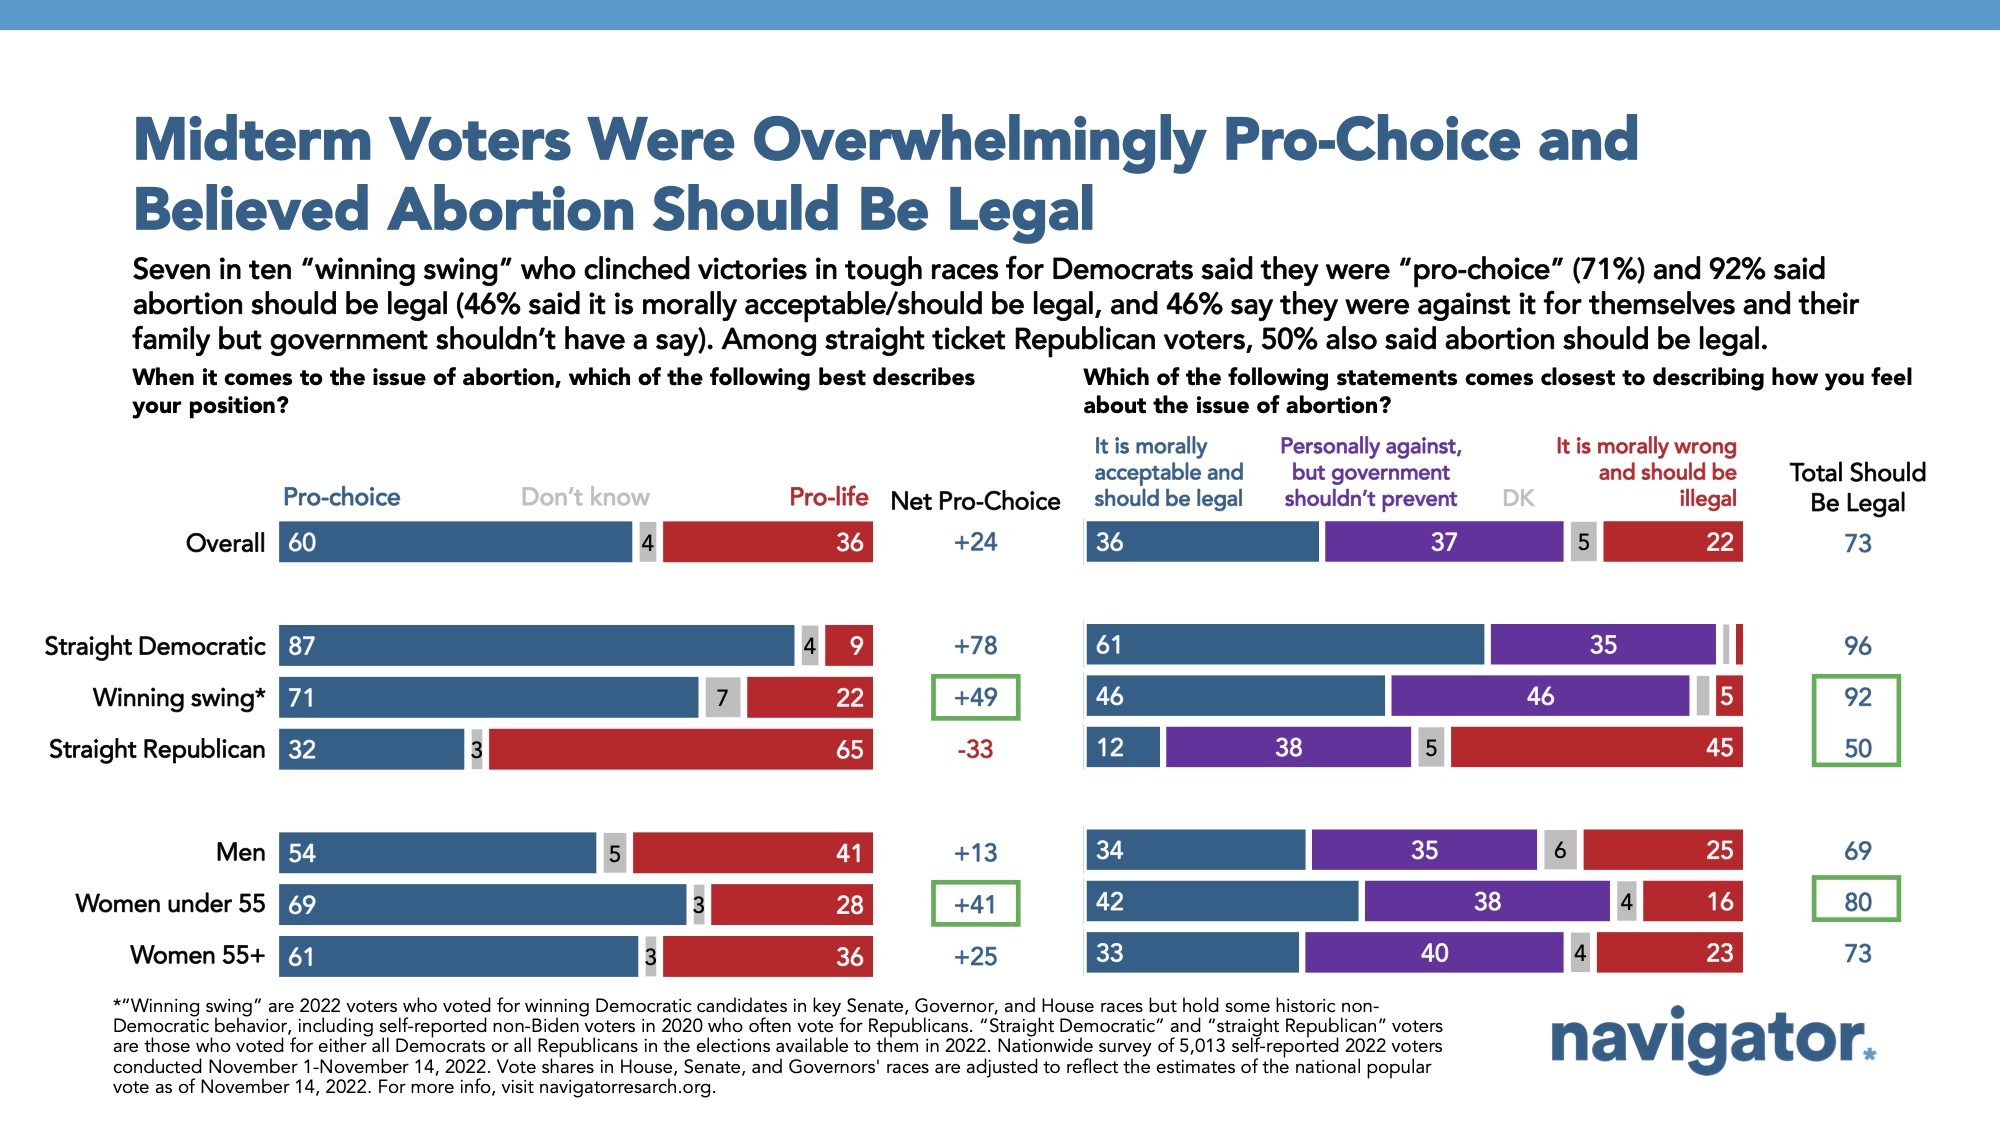 Bar graph of polling data. Title: Midterm Voters Were Overwhelmingly Pro-Choice and Believed Abortion Should Be Legal